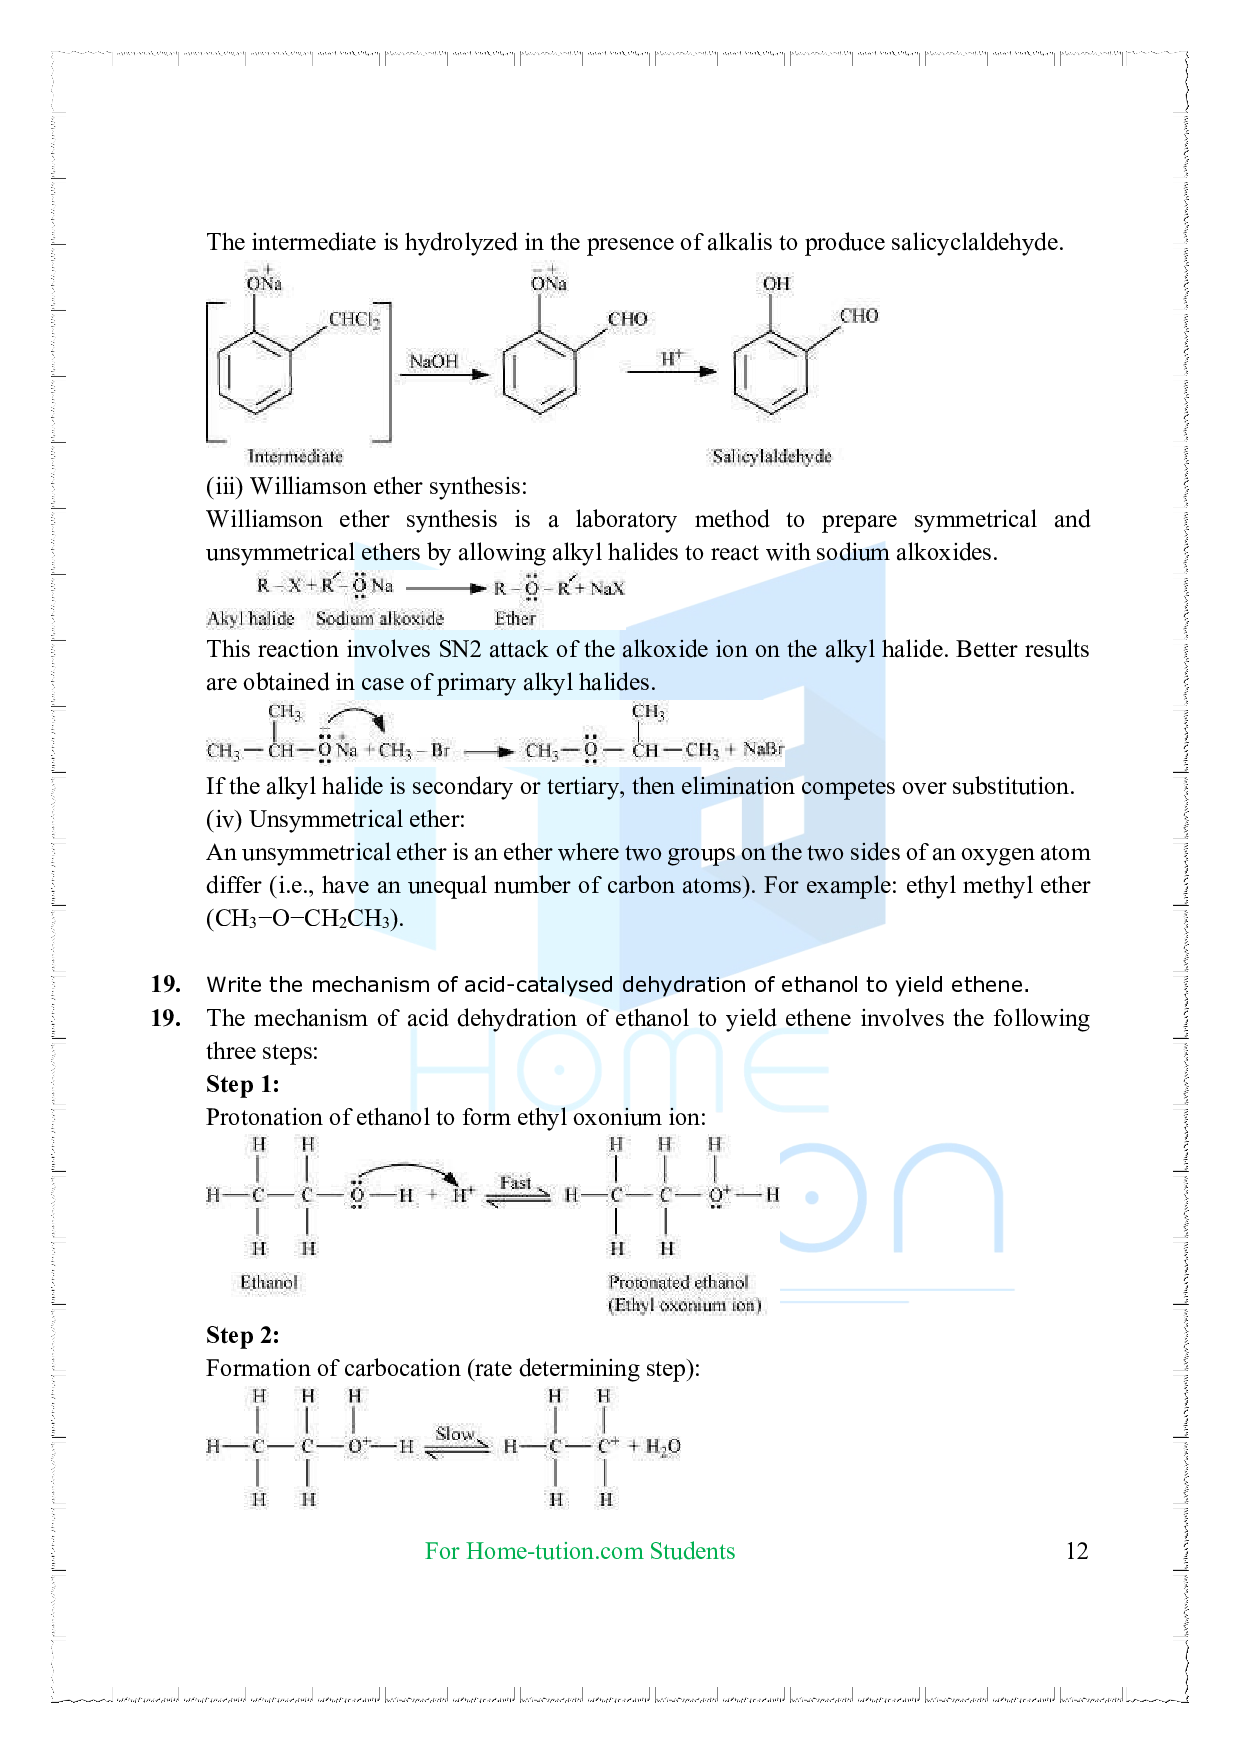 Chapter 11 Alcohols, Phenols, and Ethers